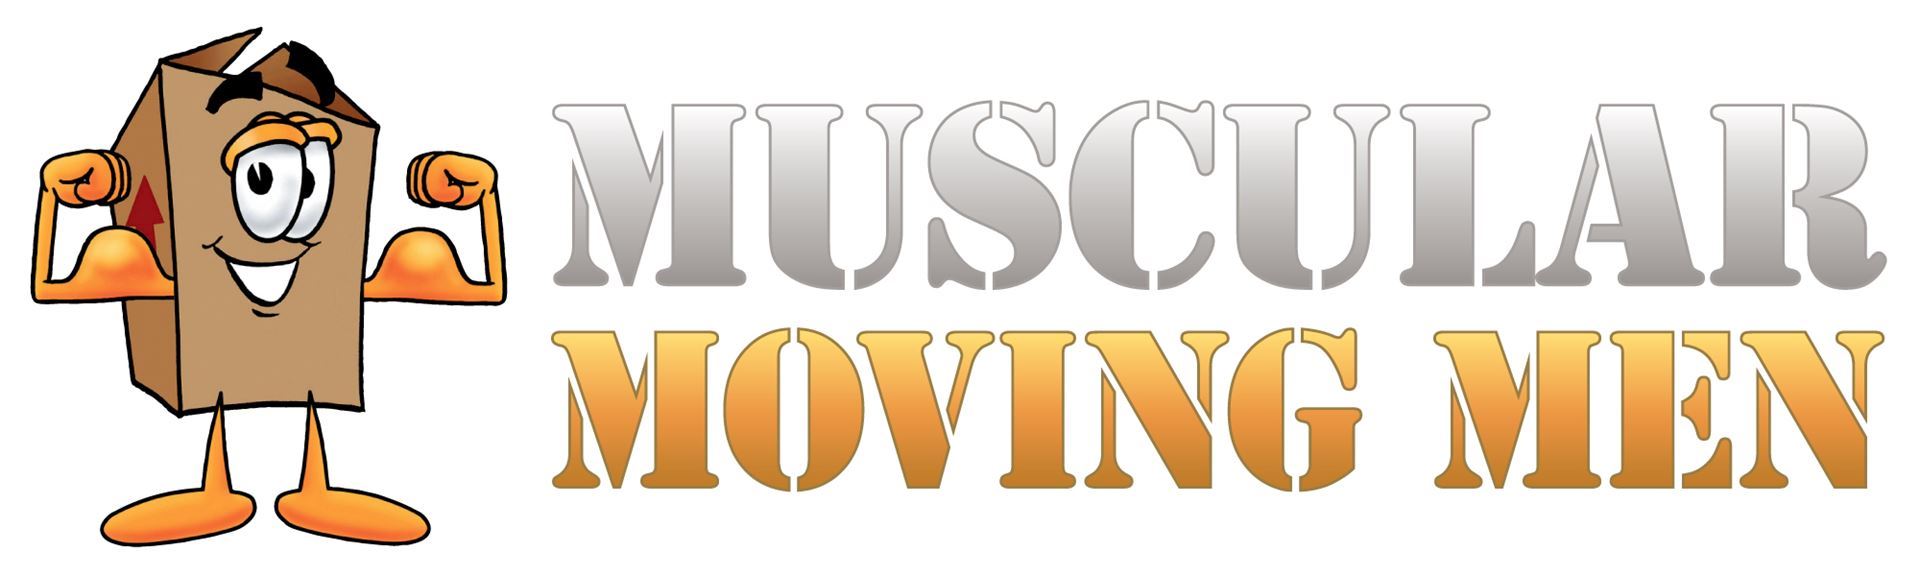 muscular moving men proud sponsor of golf and grow networking golf tournament in scottsdale az